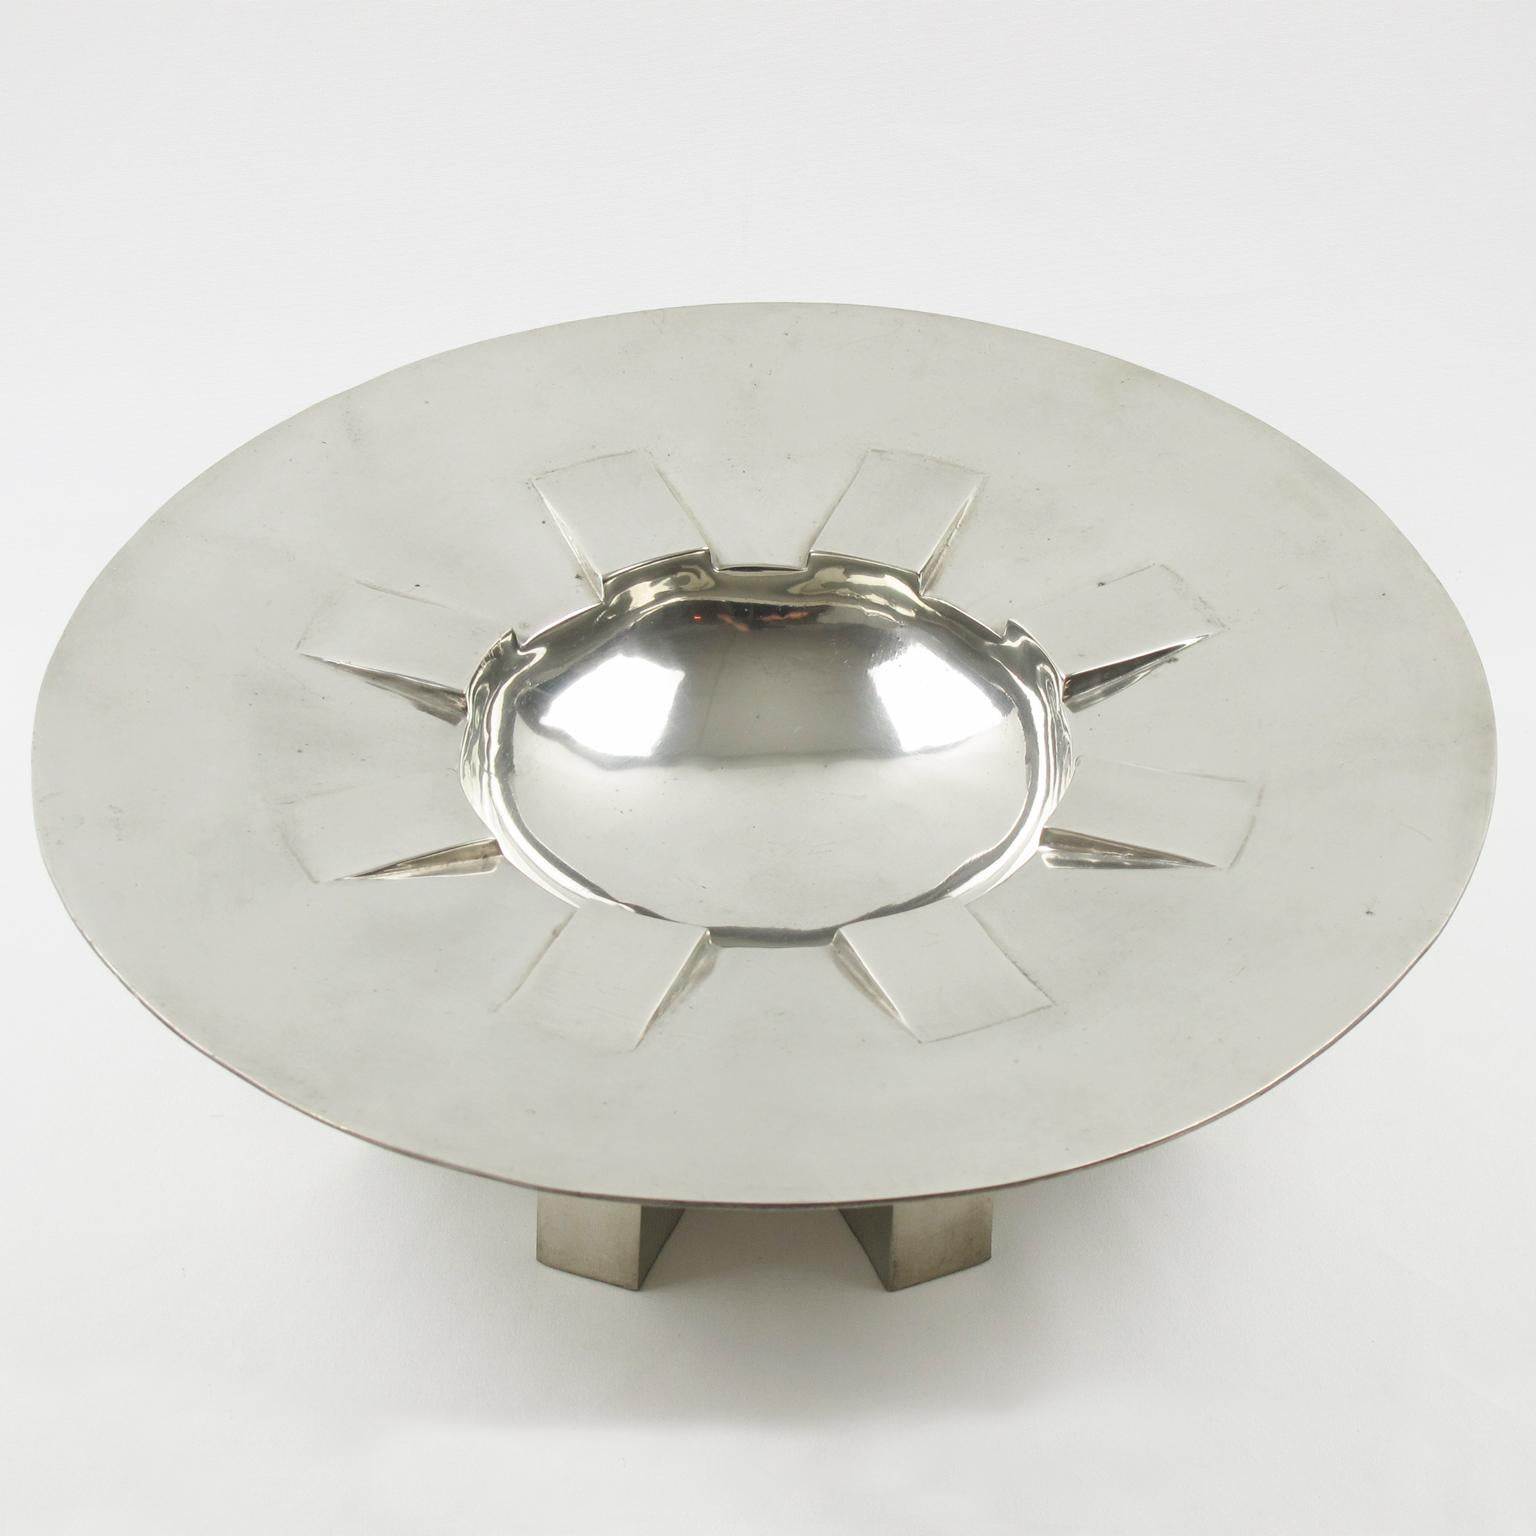 Modern Space Age Futurist Pewter Centerpiece Bowl by For Interieur France